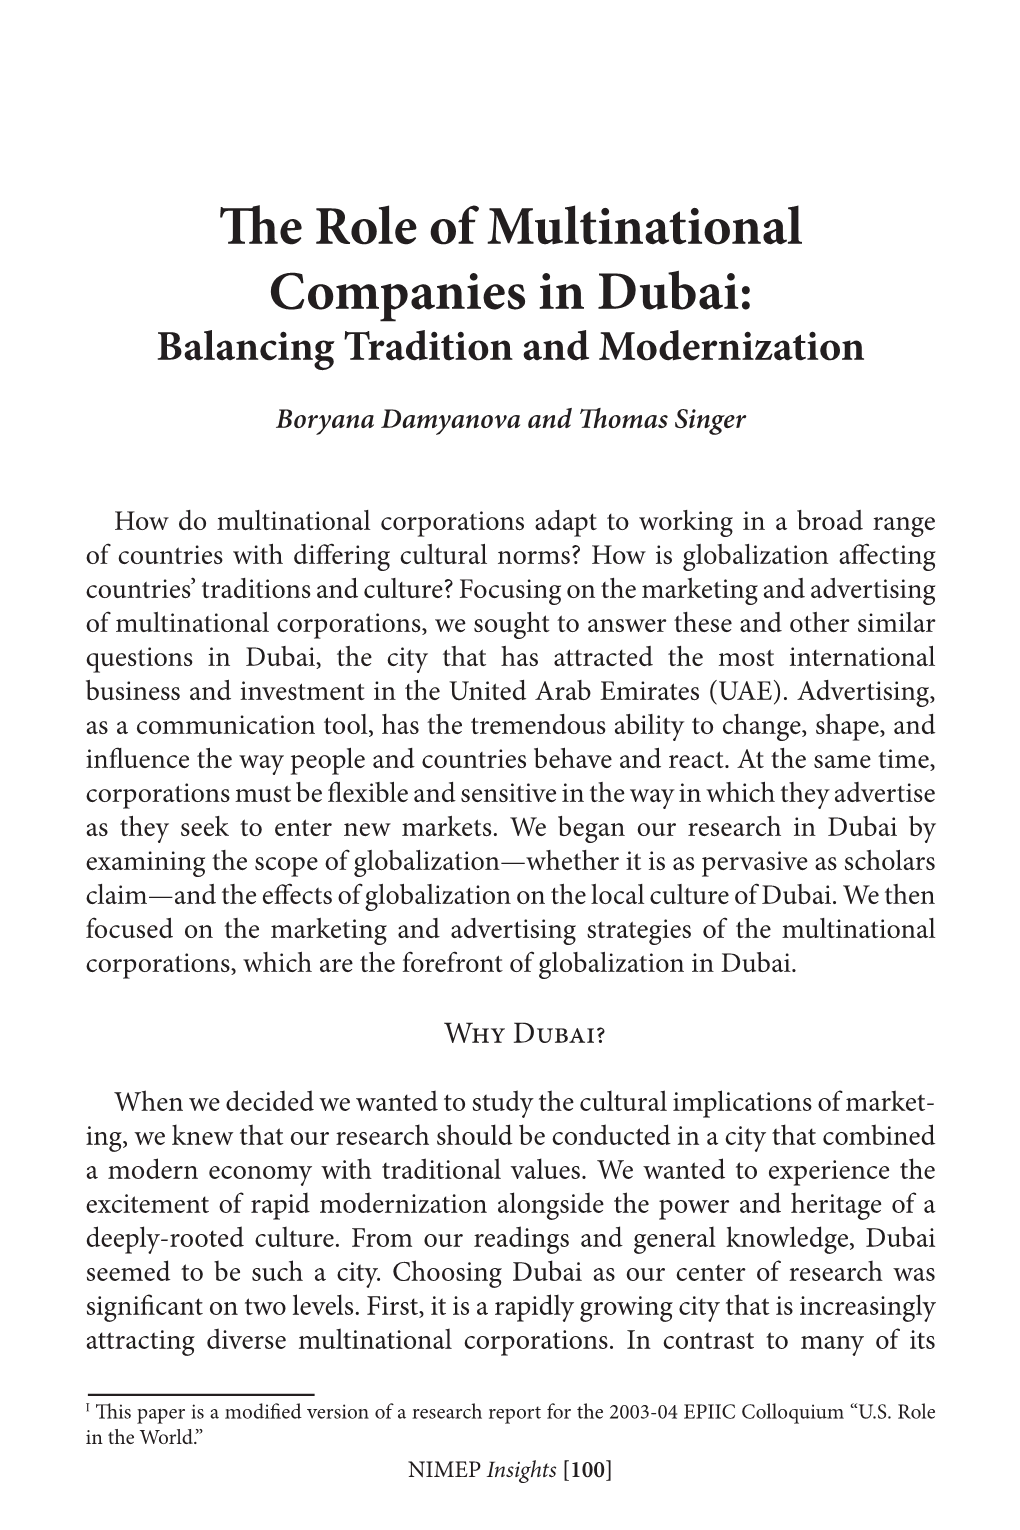 The Role of Multinational Corporations in Dubai